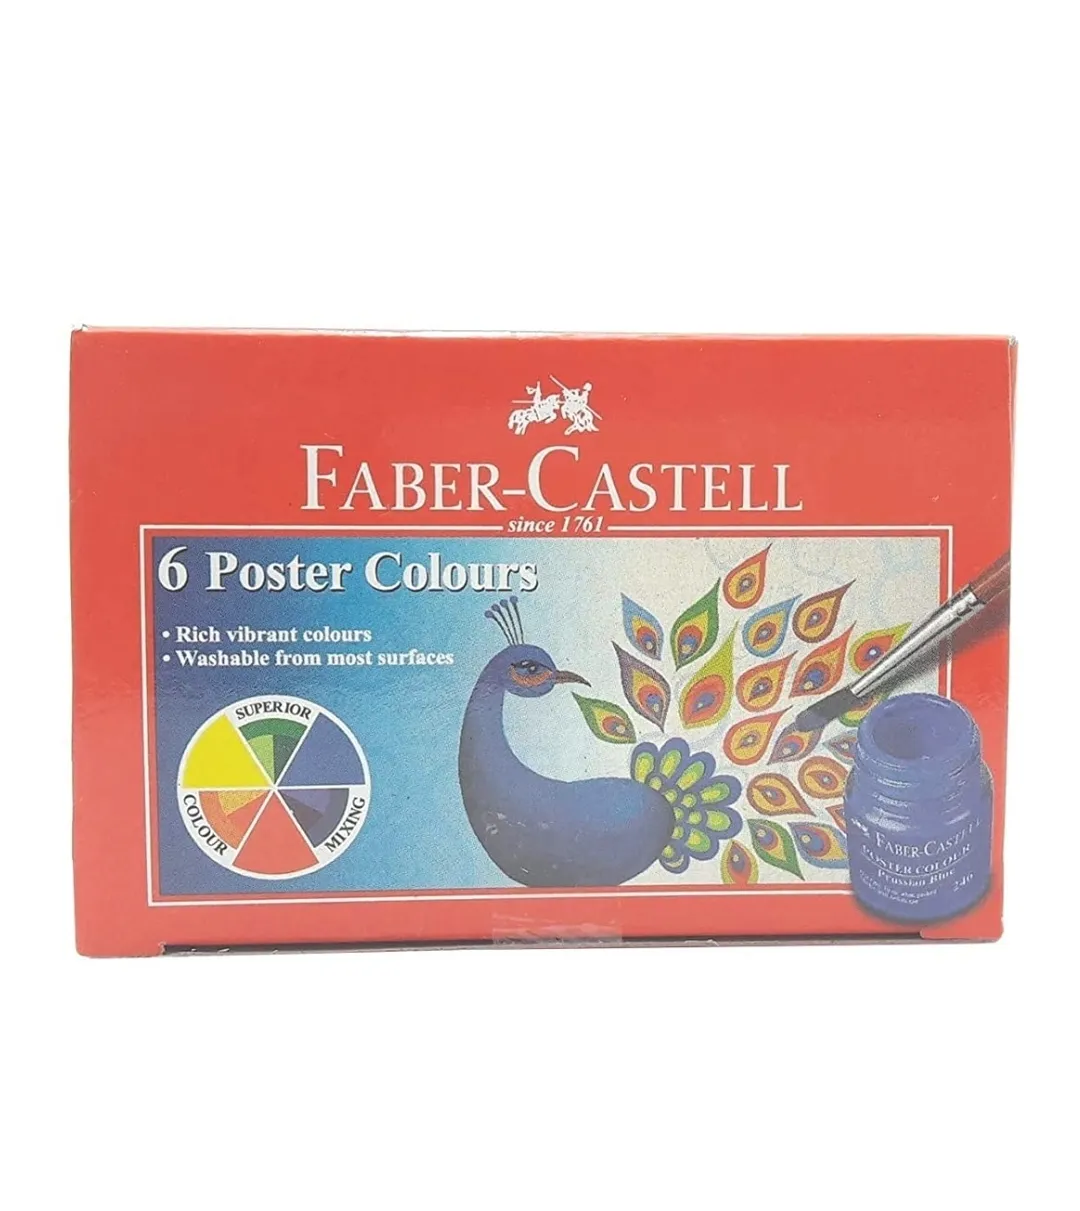 Faber Castell Poster Colours Set of 6 Shades